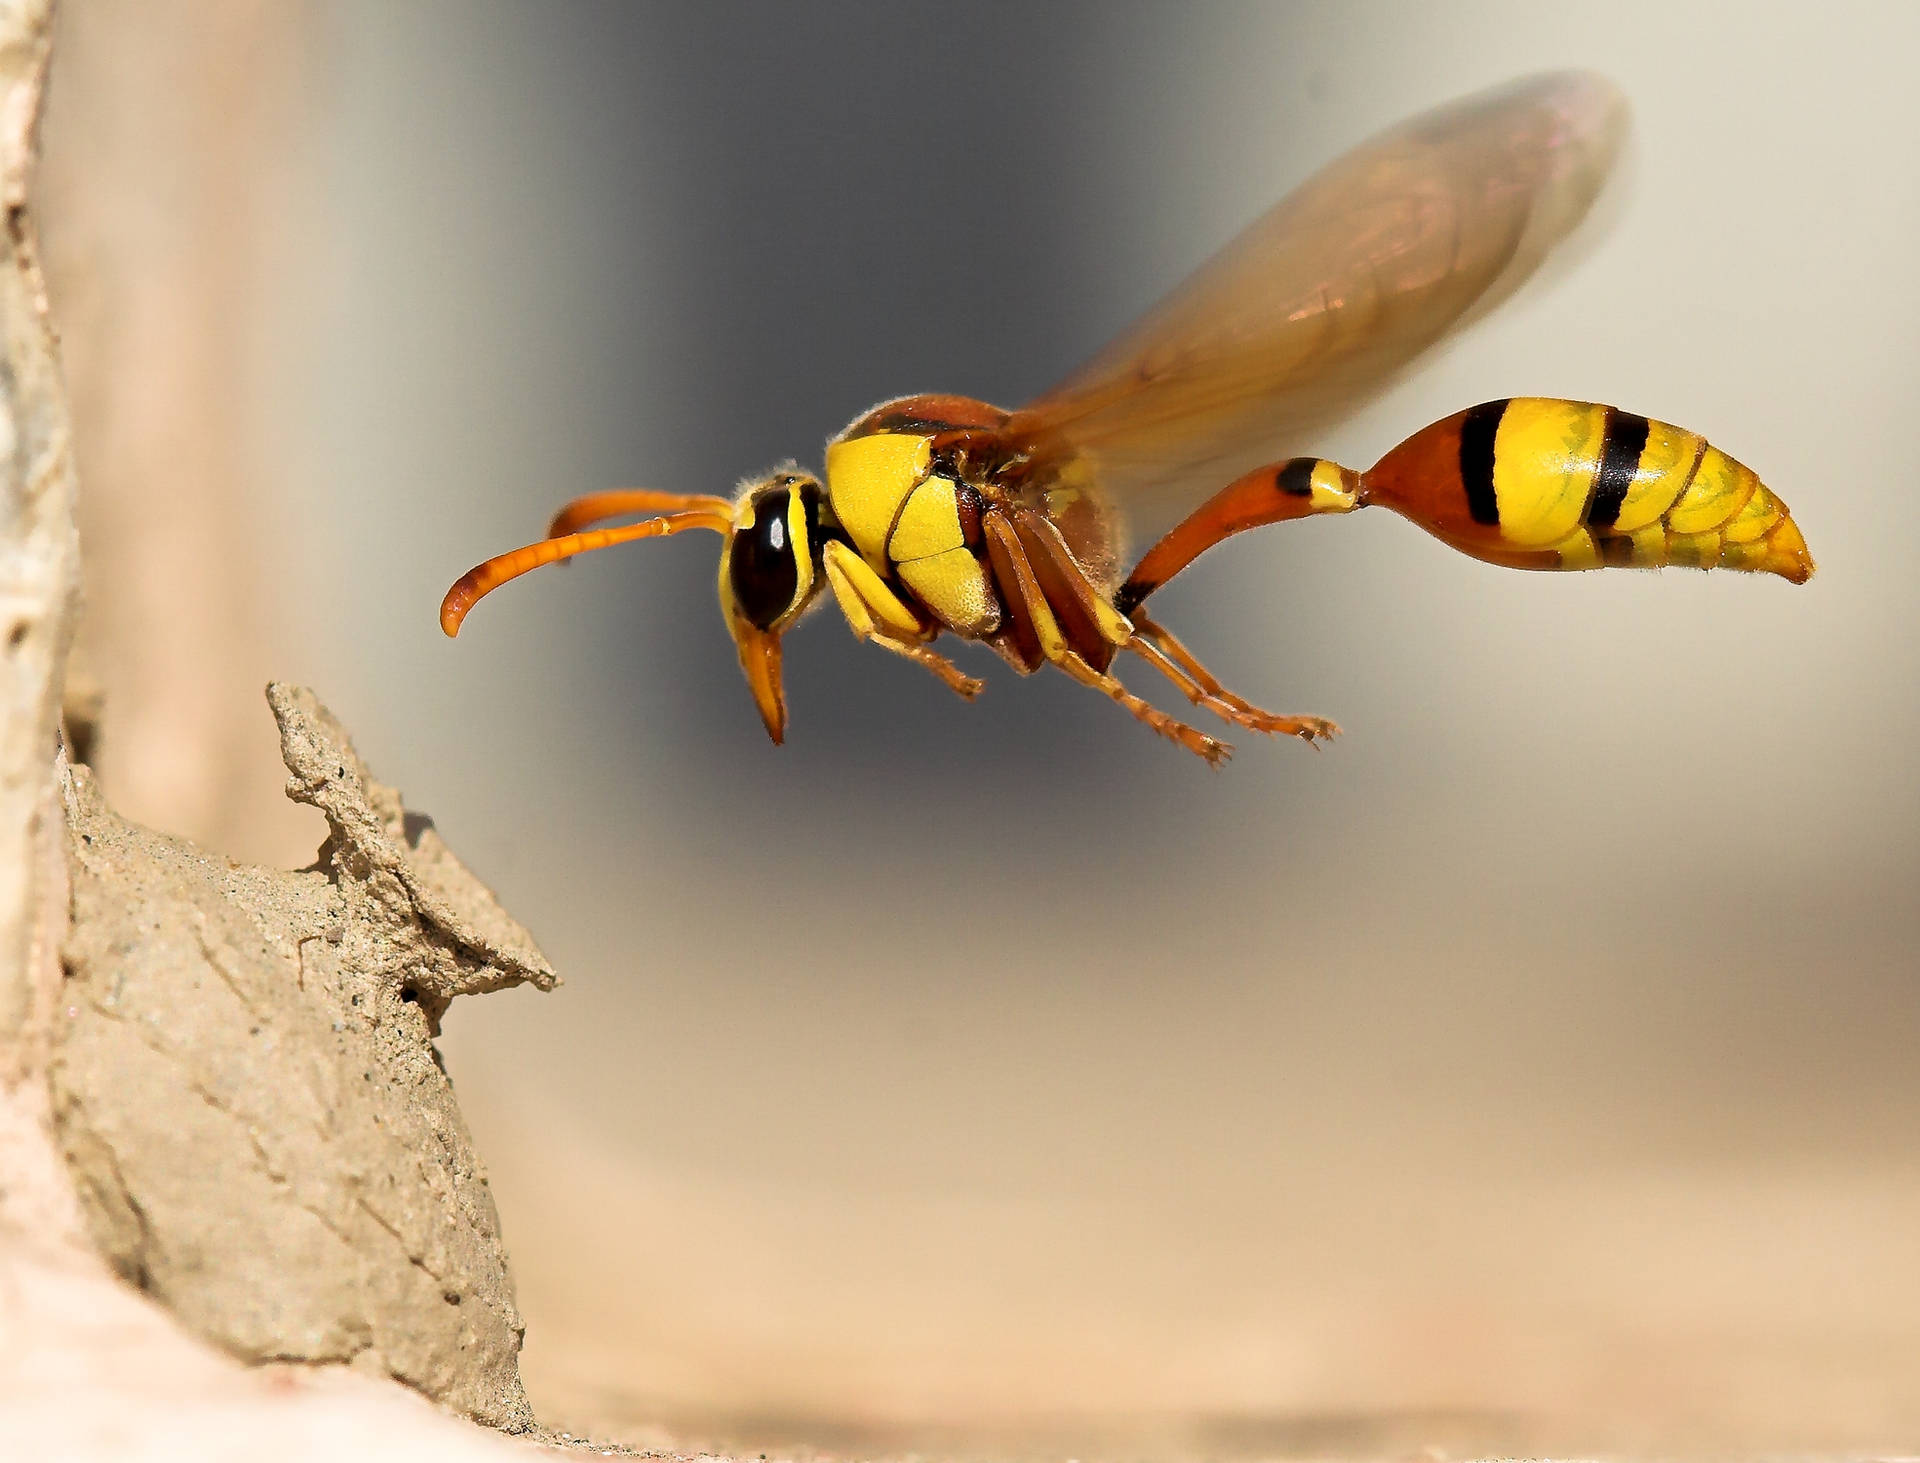 Insect Hornet With Slender Body